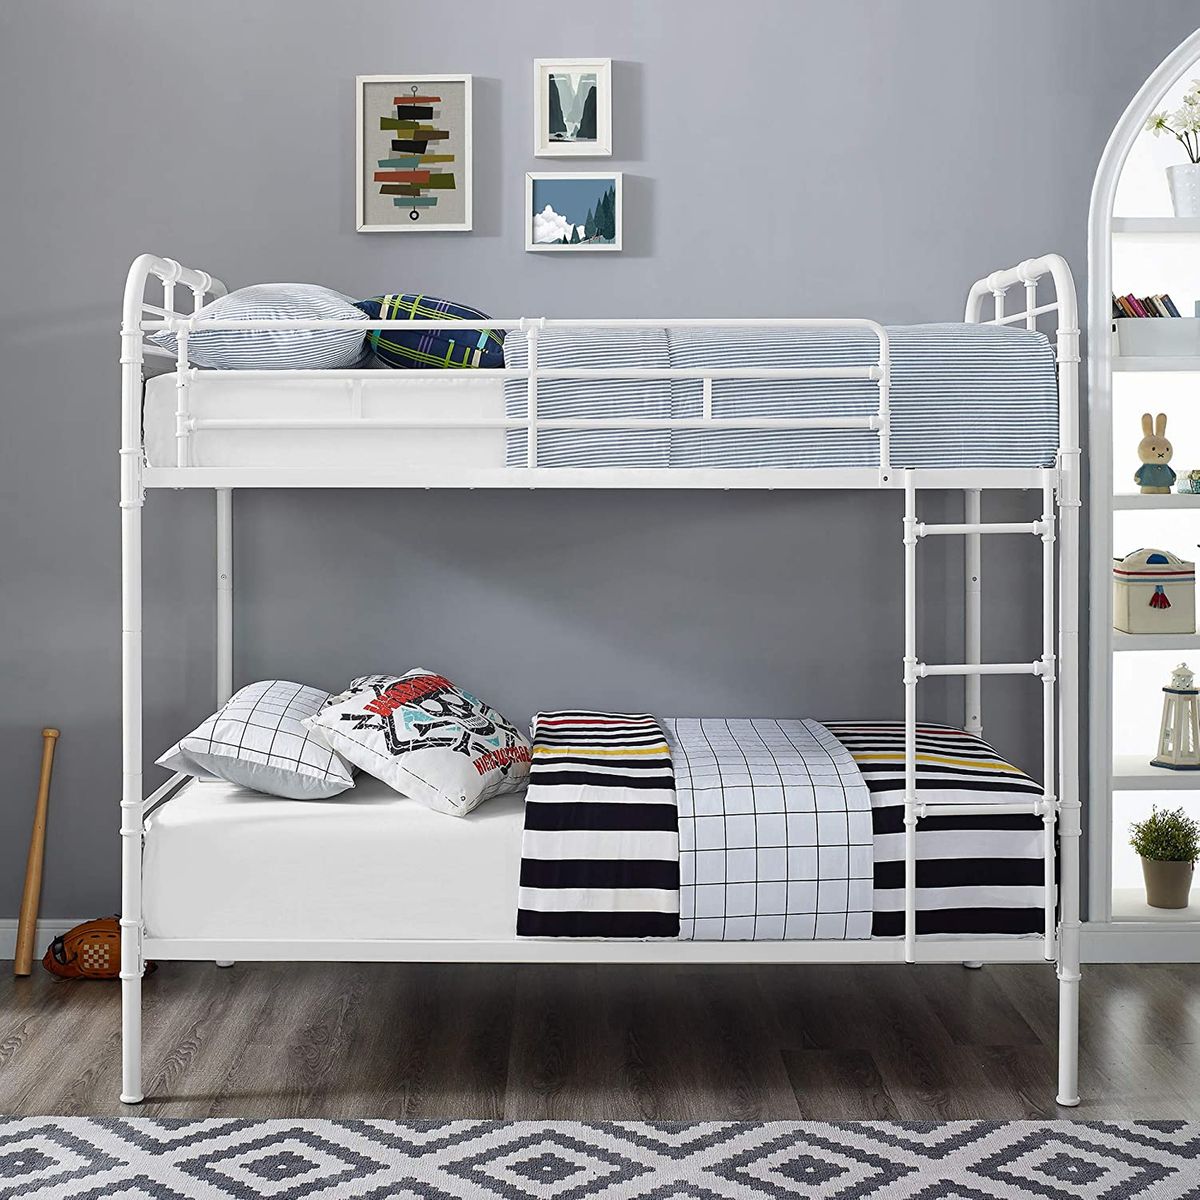 8 Best Bunk Beds 2020 The Strategist, Bunk Beds For Less Than 200